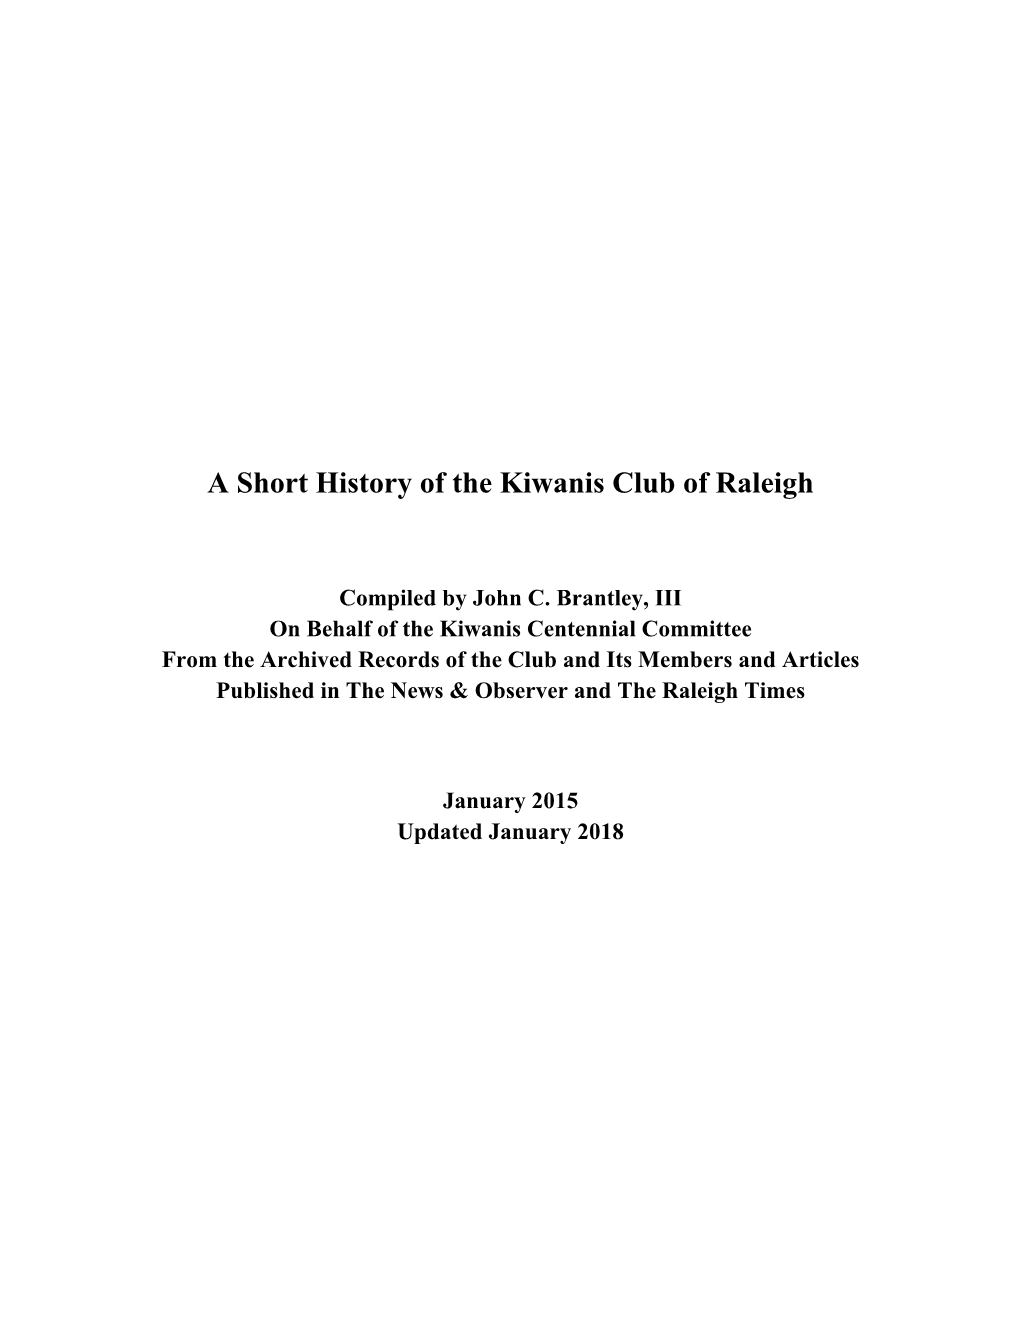 A Short History of the Kiwanis Club of Raleigh